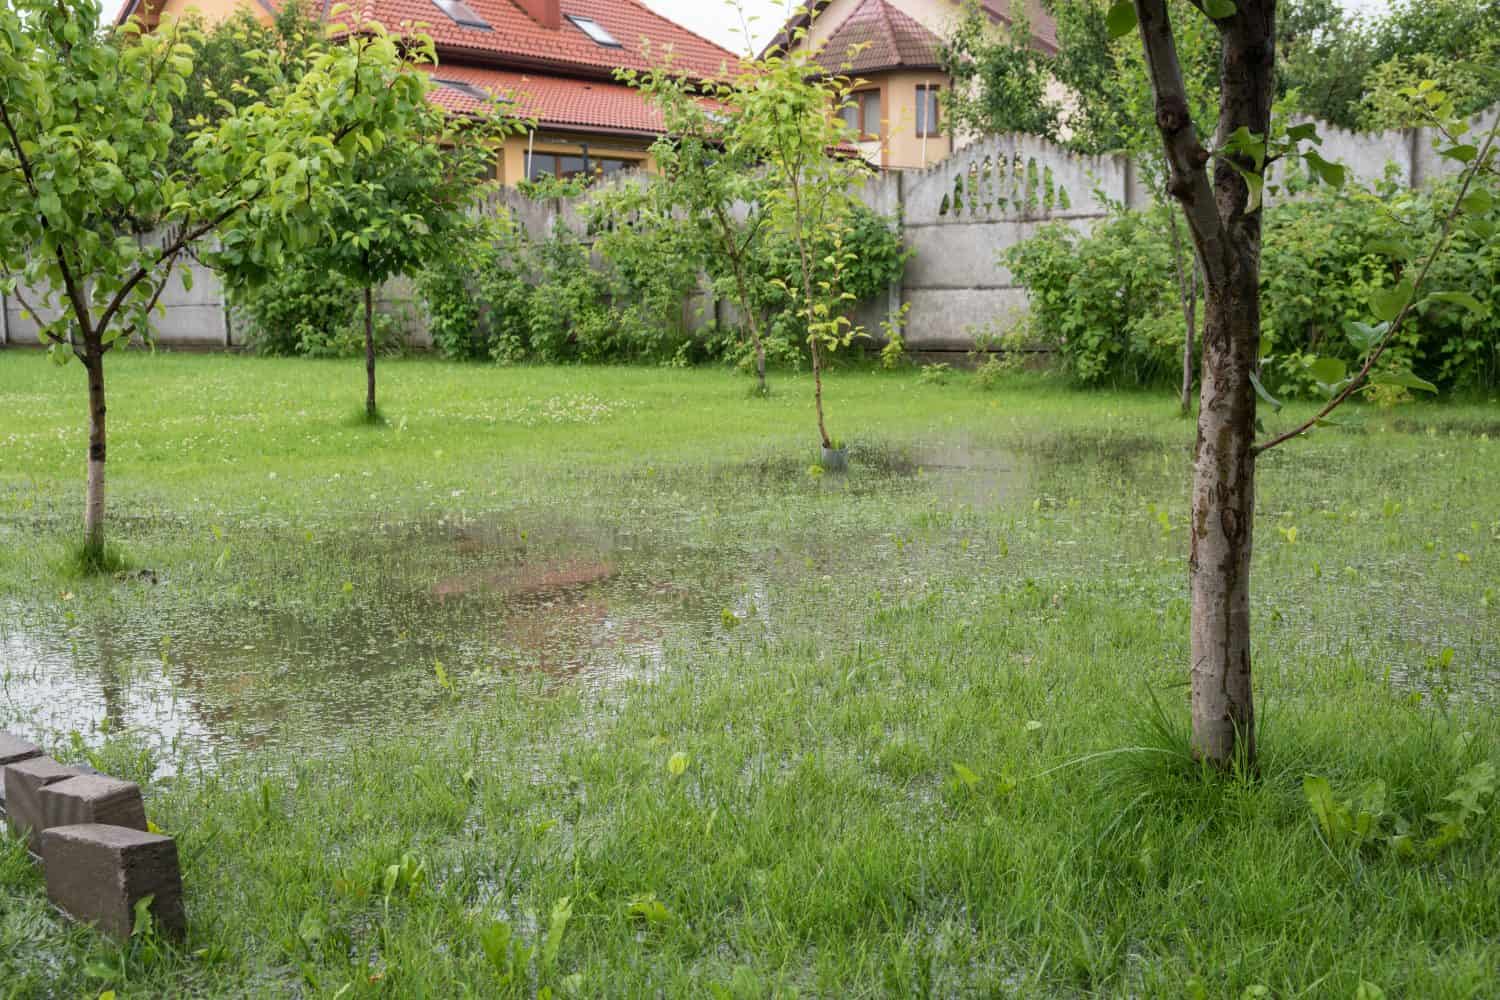 The garden is flooded. Consequences of downpour, flood. Rainy summer in Ukraine, 2020.